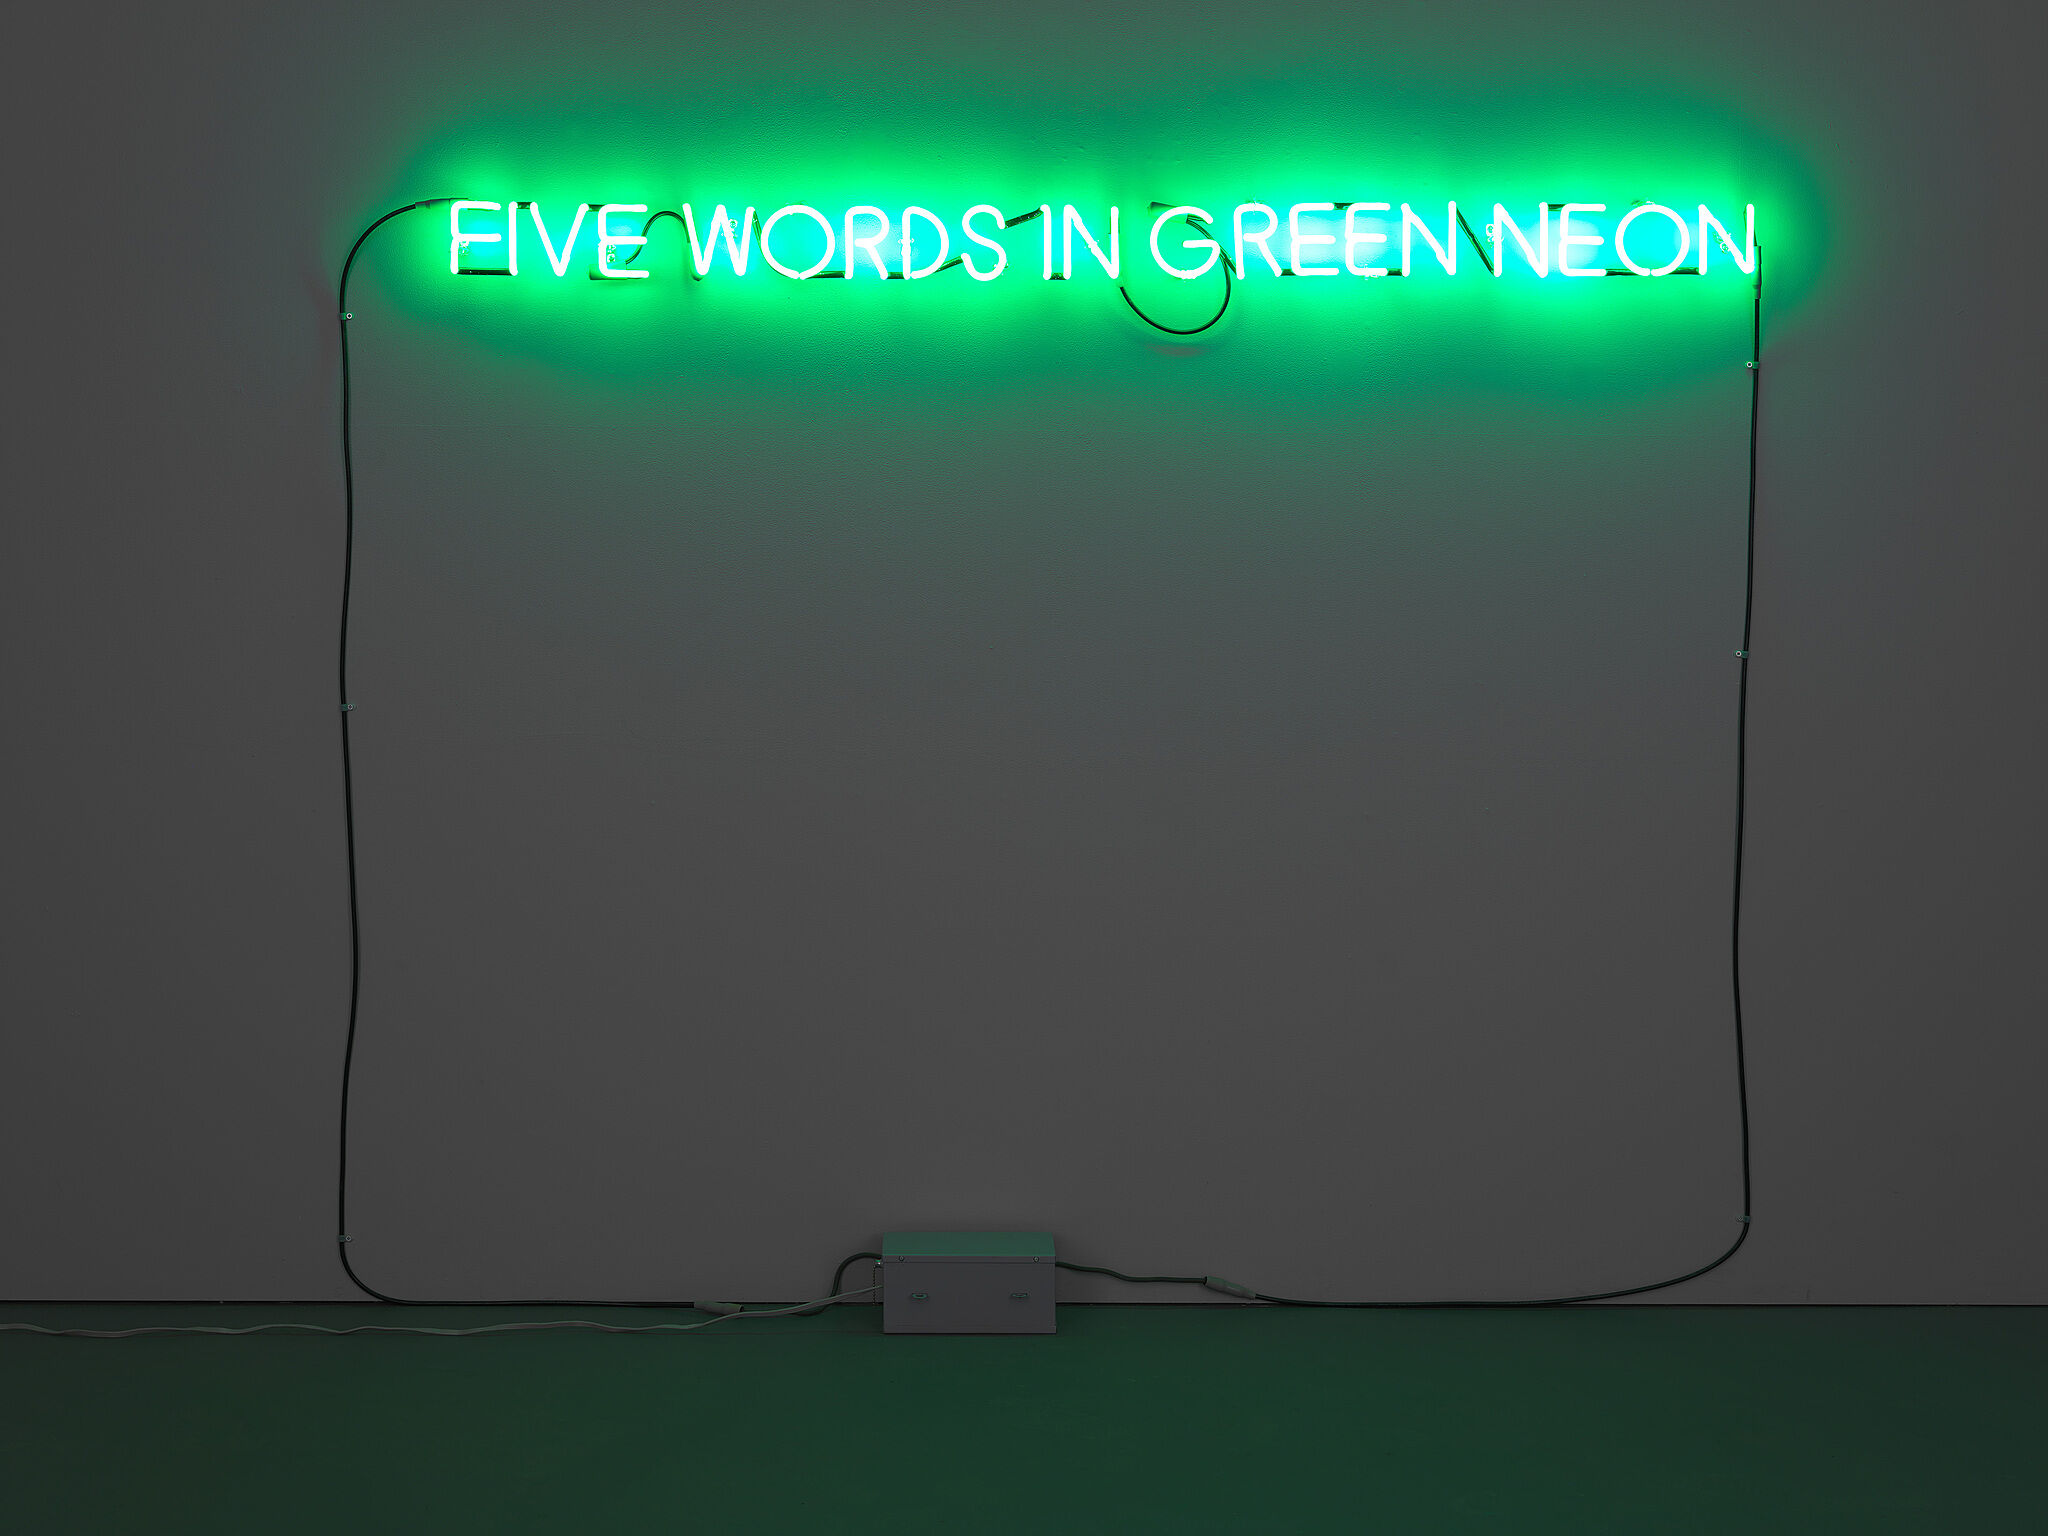 Five words in green neon lights hanging on the wall.